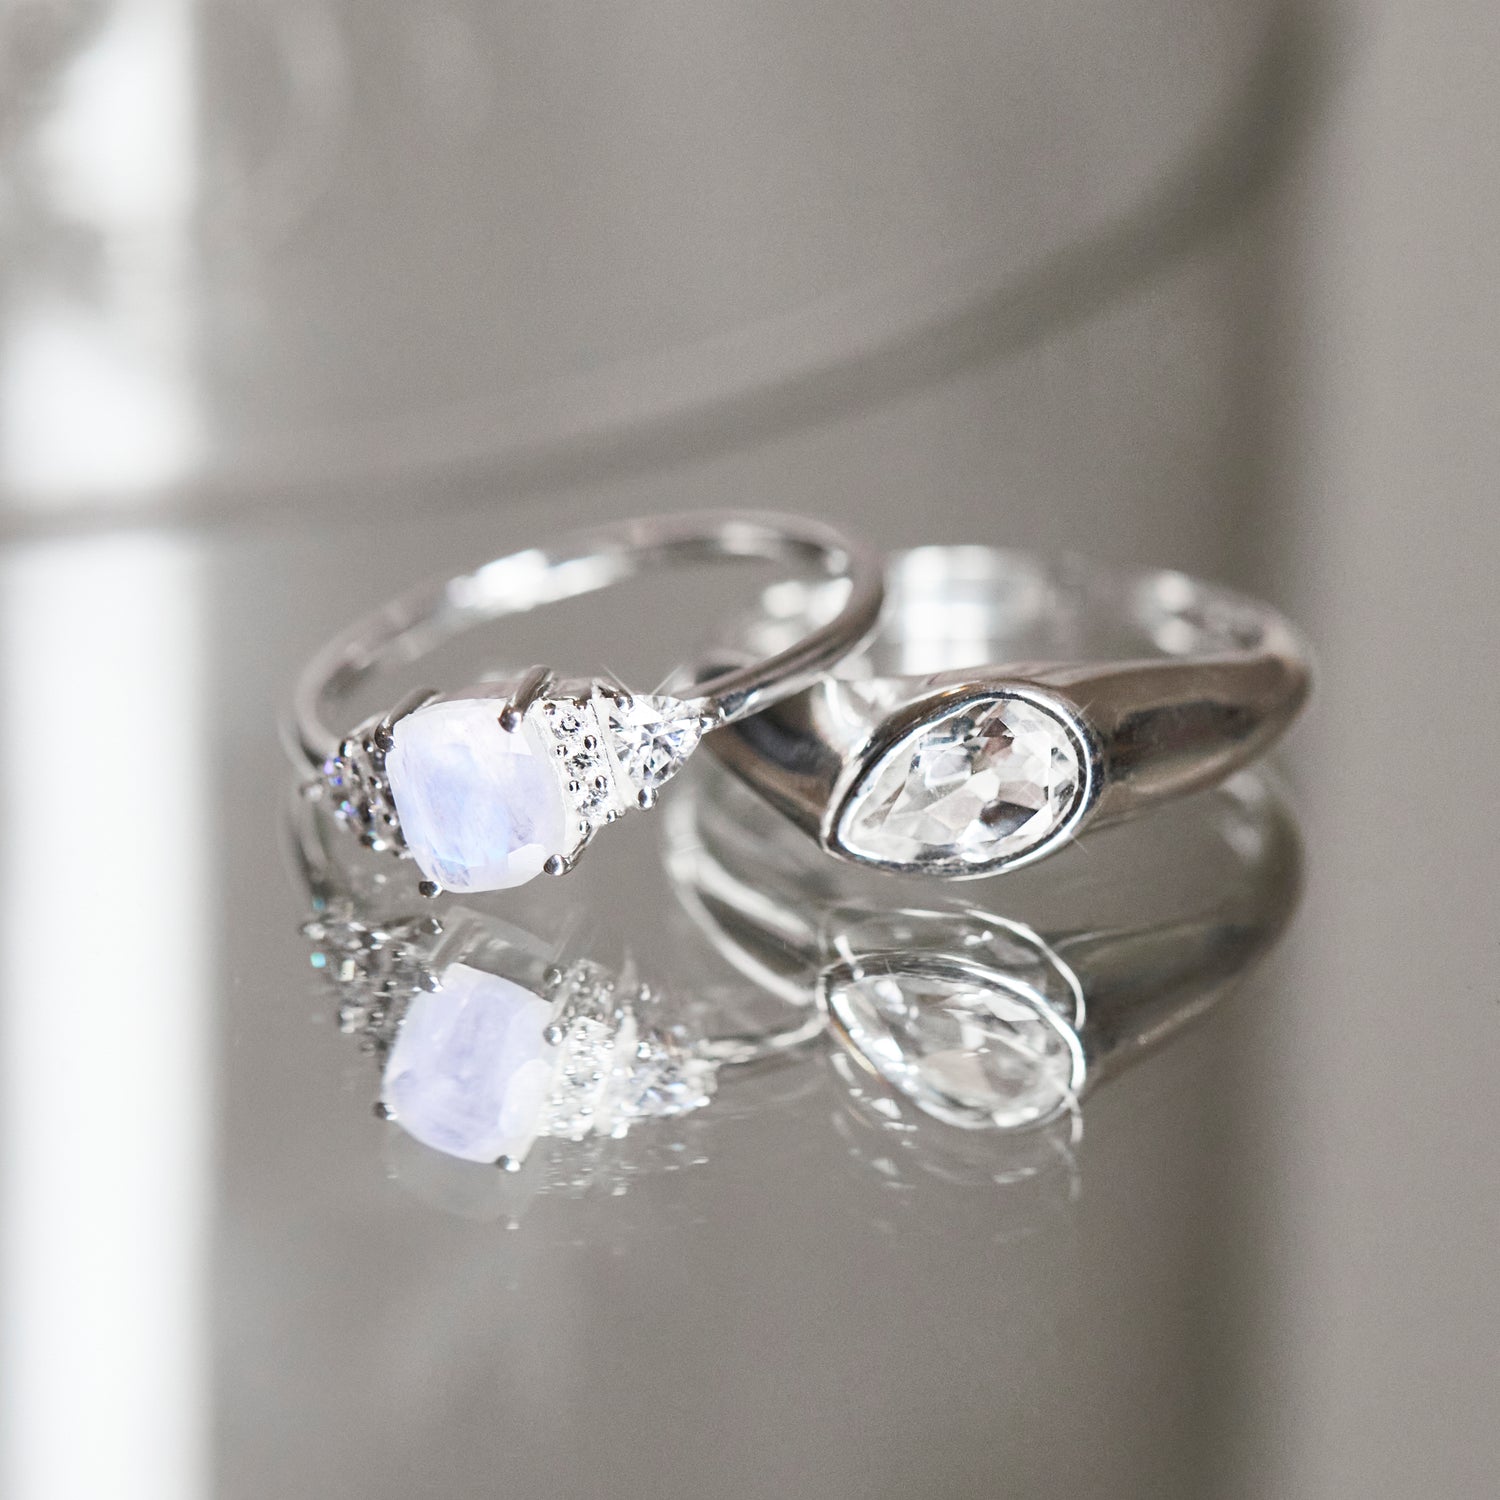 Zoe sugg intentions topaz heal ring in silver